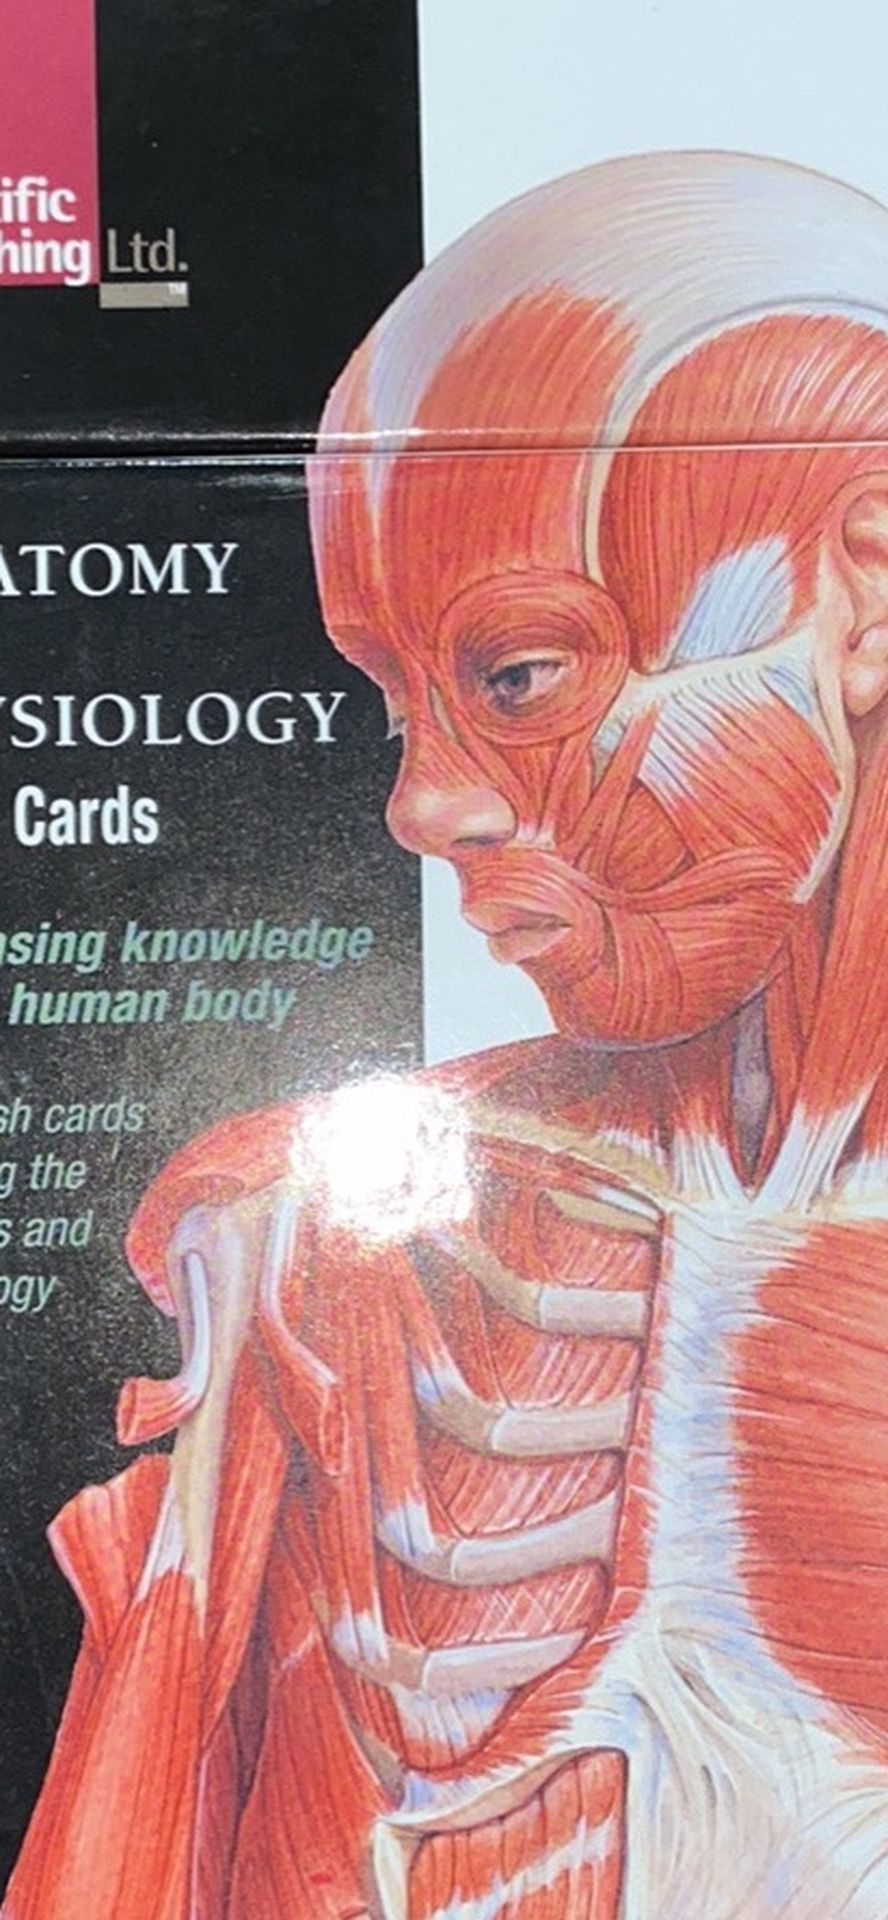 Anatomy And Physiology Flashcards